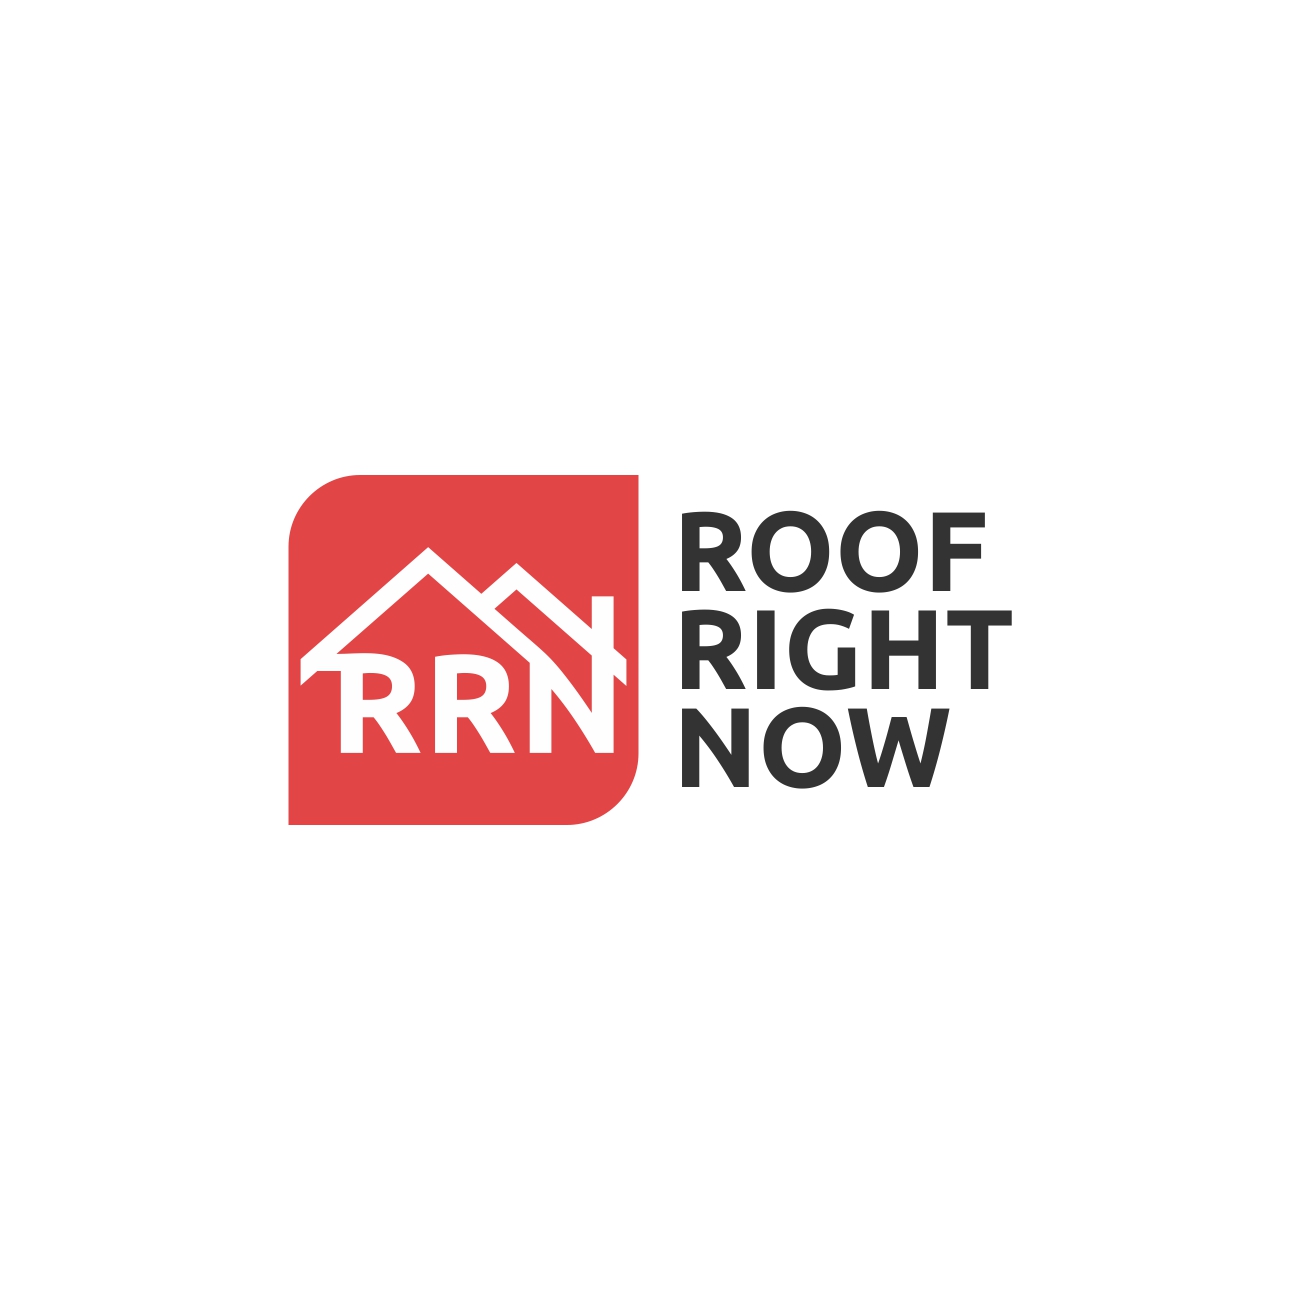 Roof Right Now Highlights the Signs That a Roof Needs Repair